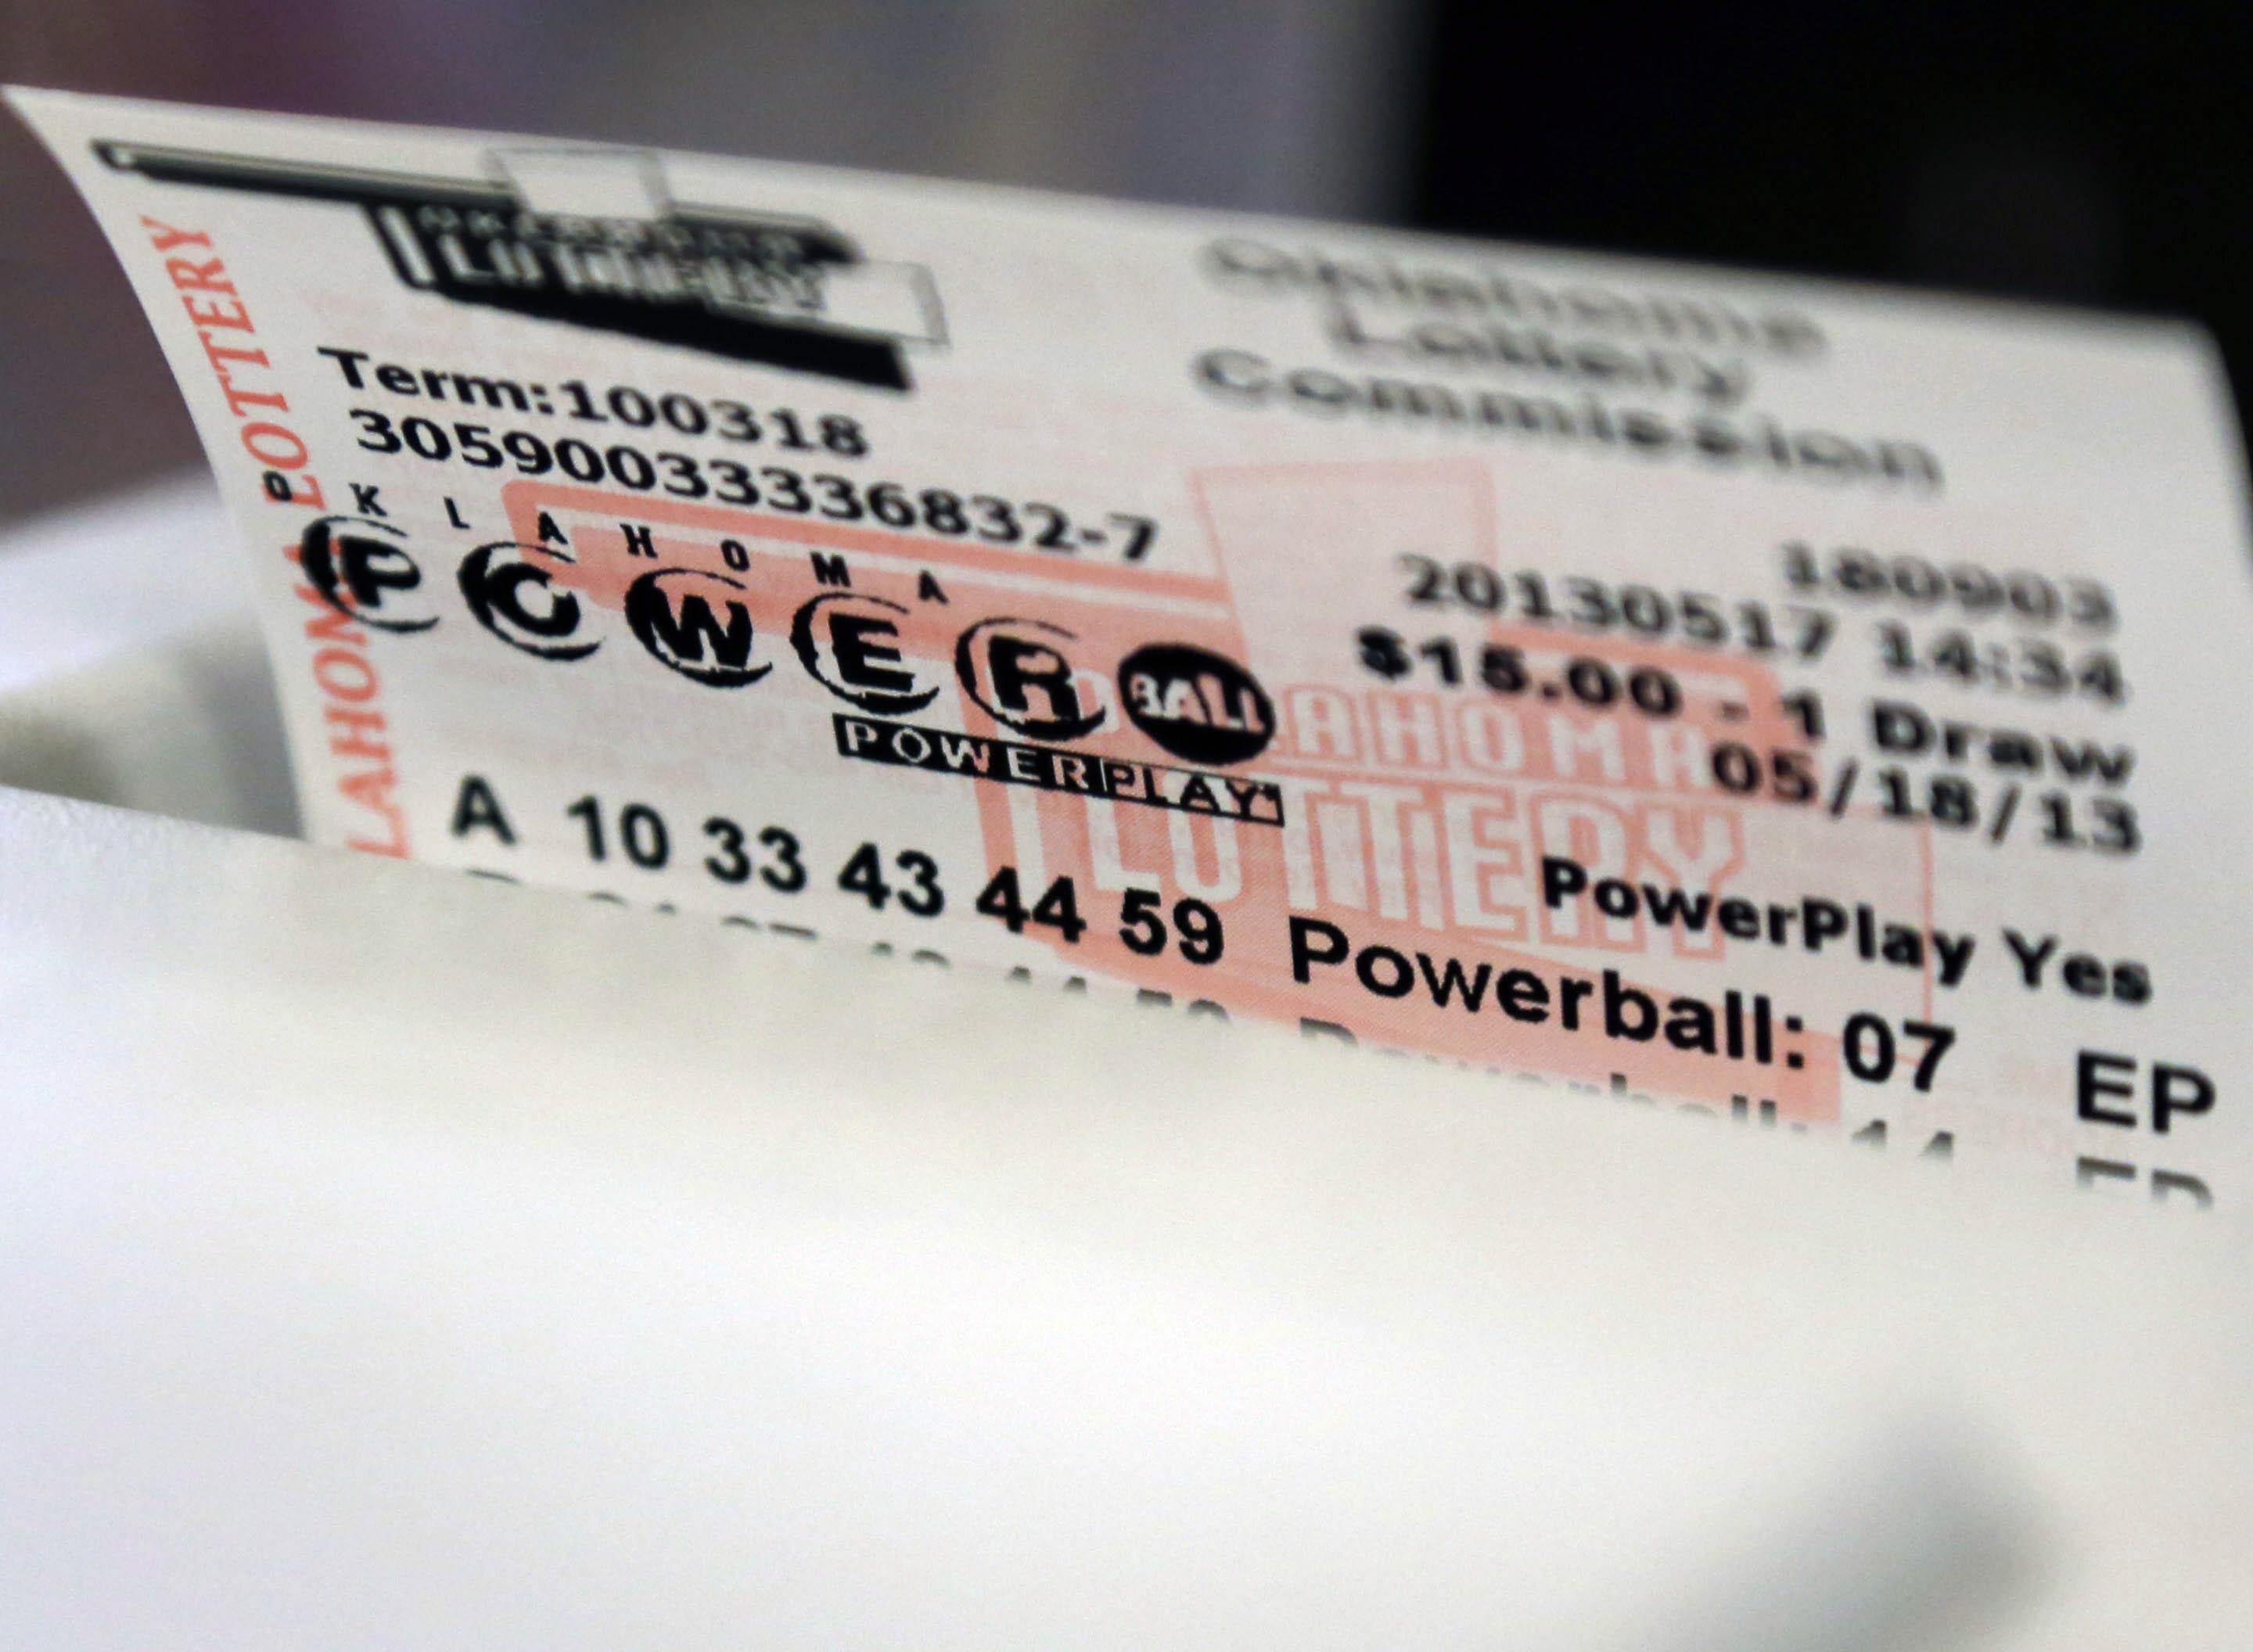 A Powerball Lottery ticket is dispensed from a machine in Oklahoma City, Friday, May 17, 2013.